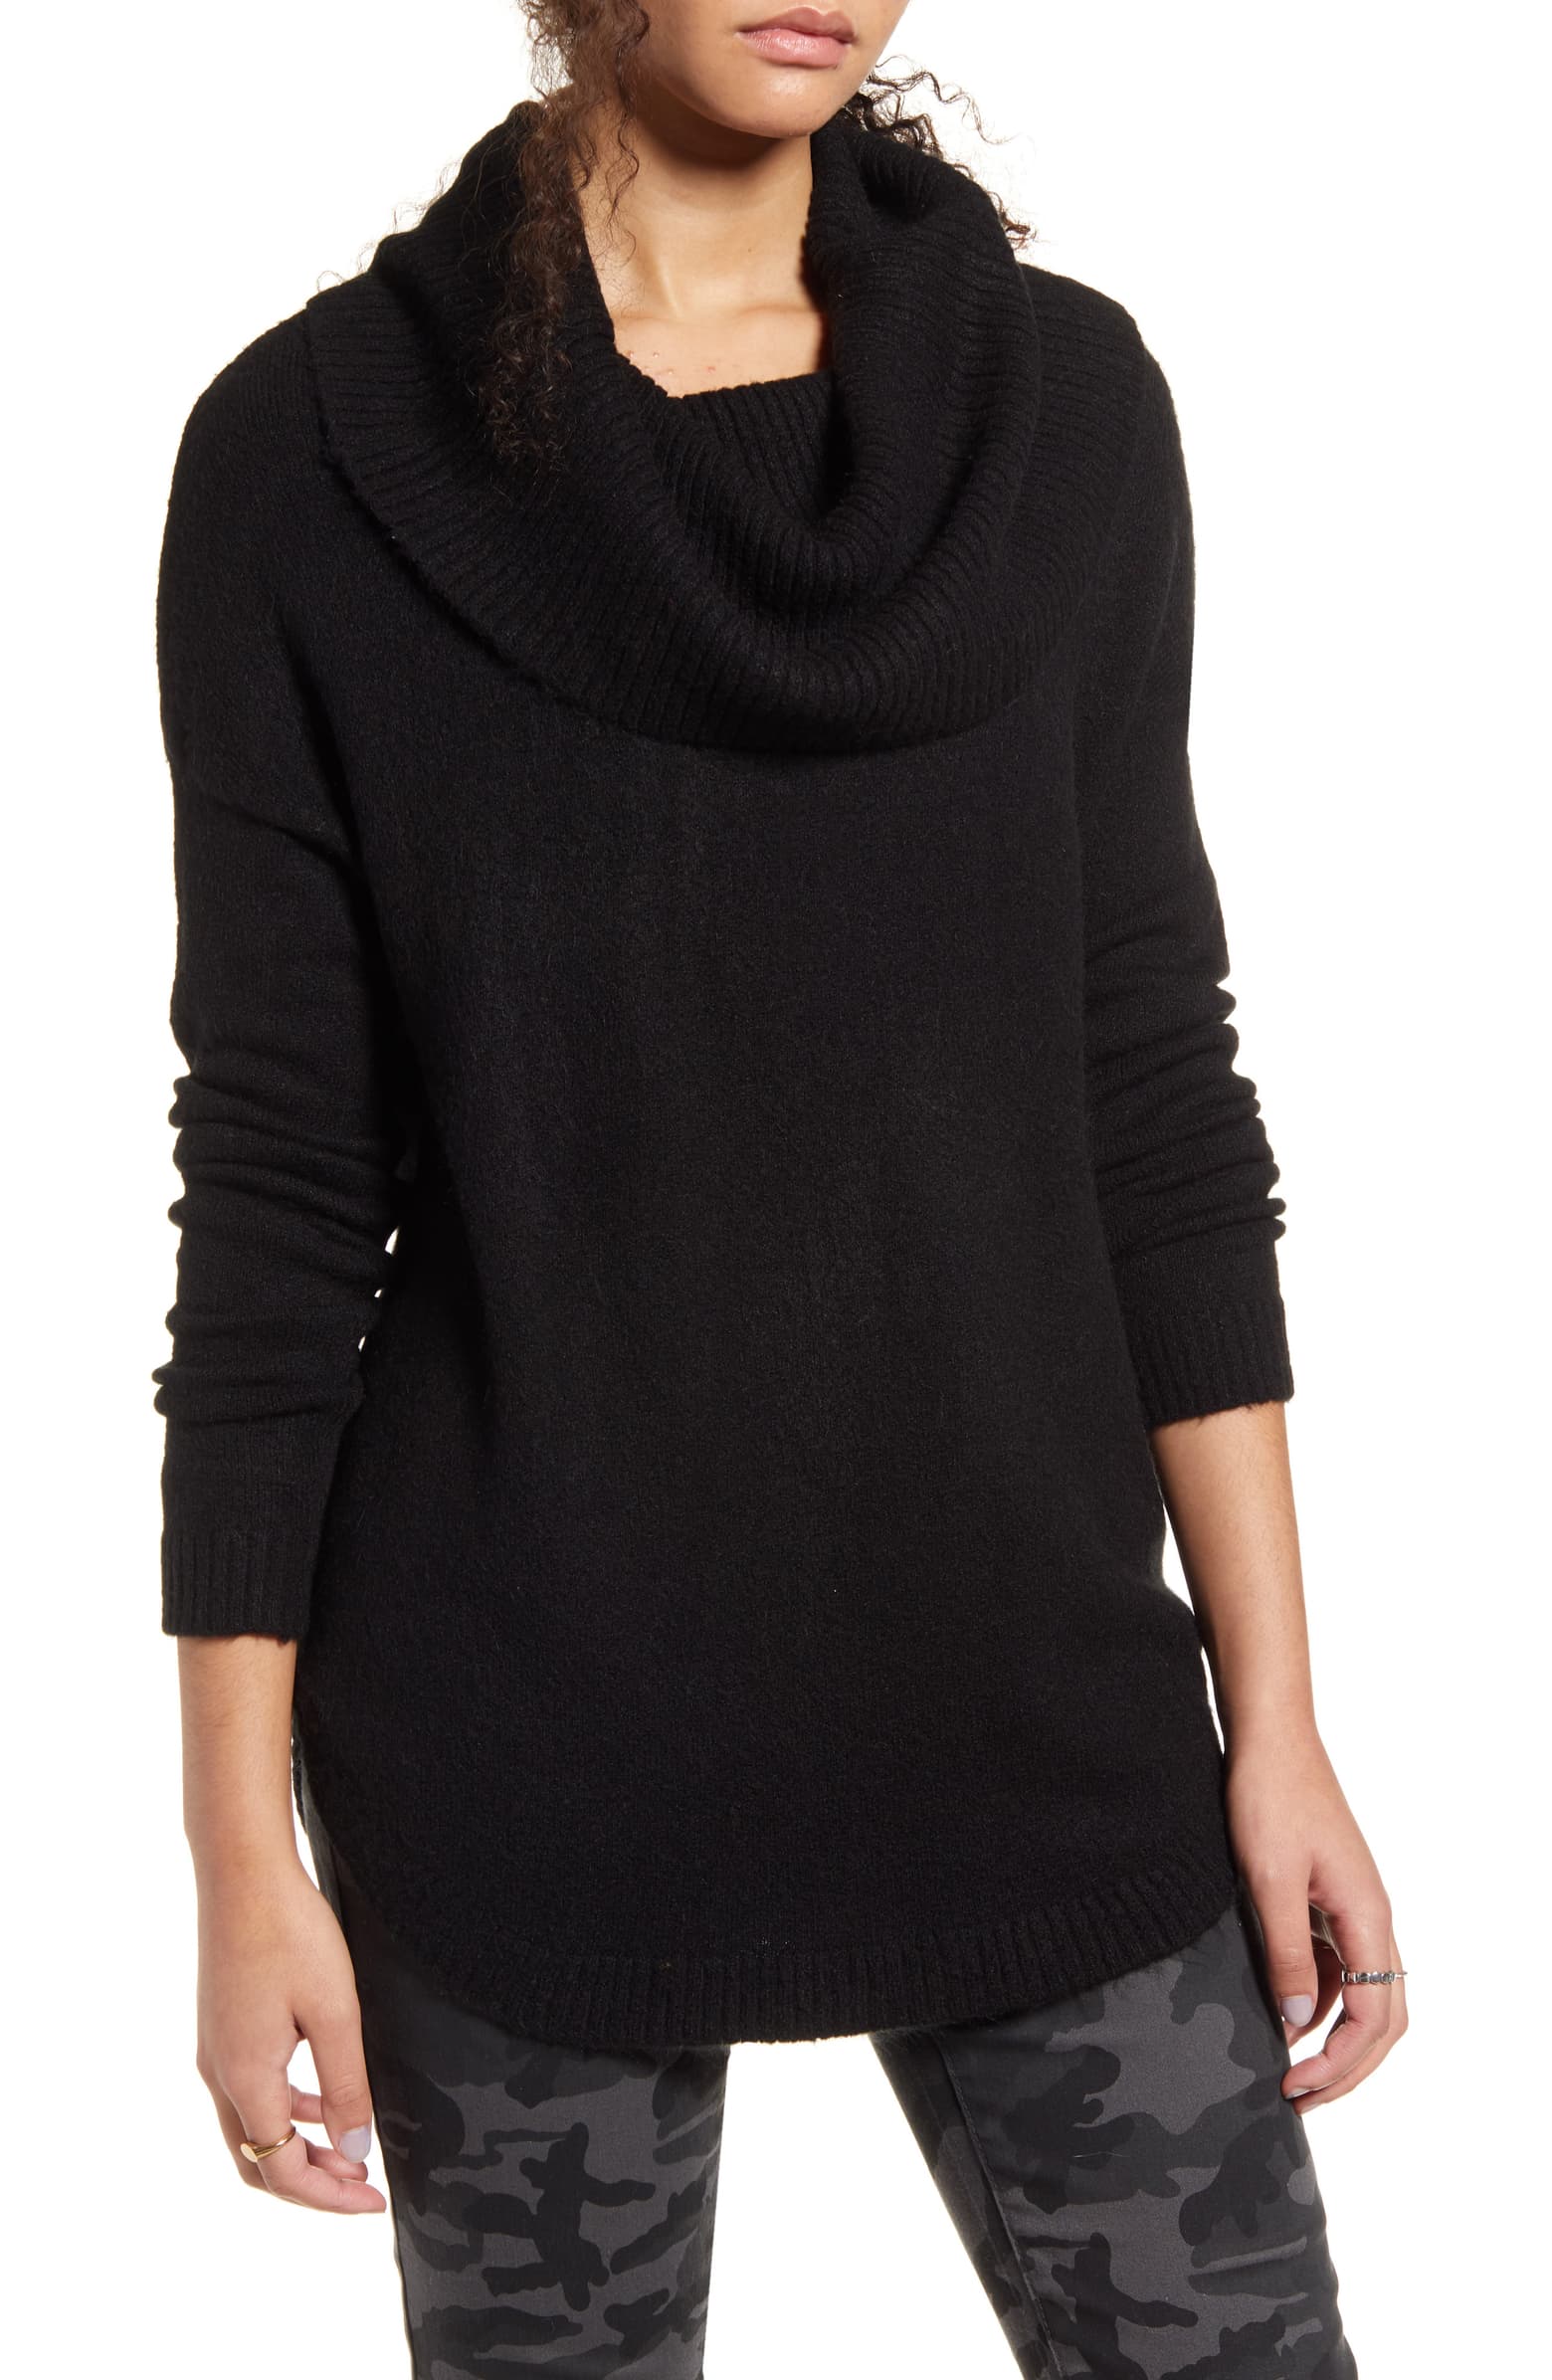 Don’t Wait Until Cyber Monday–This Warm $27 Sweater Will Probably Be ...